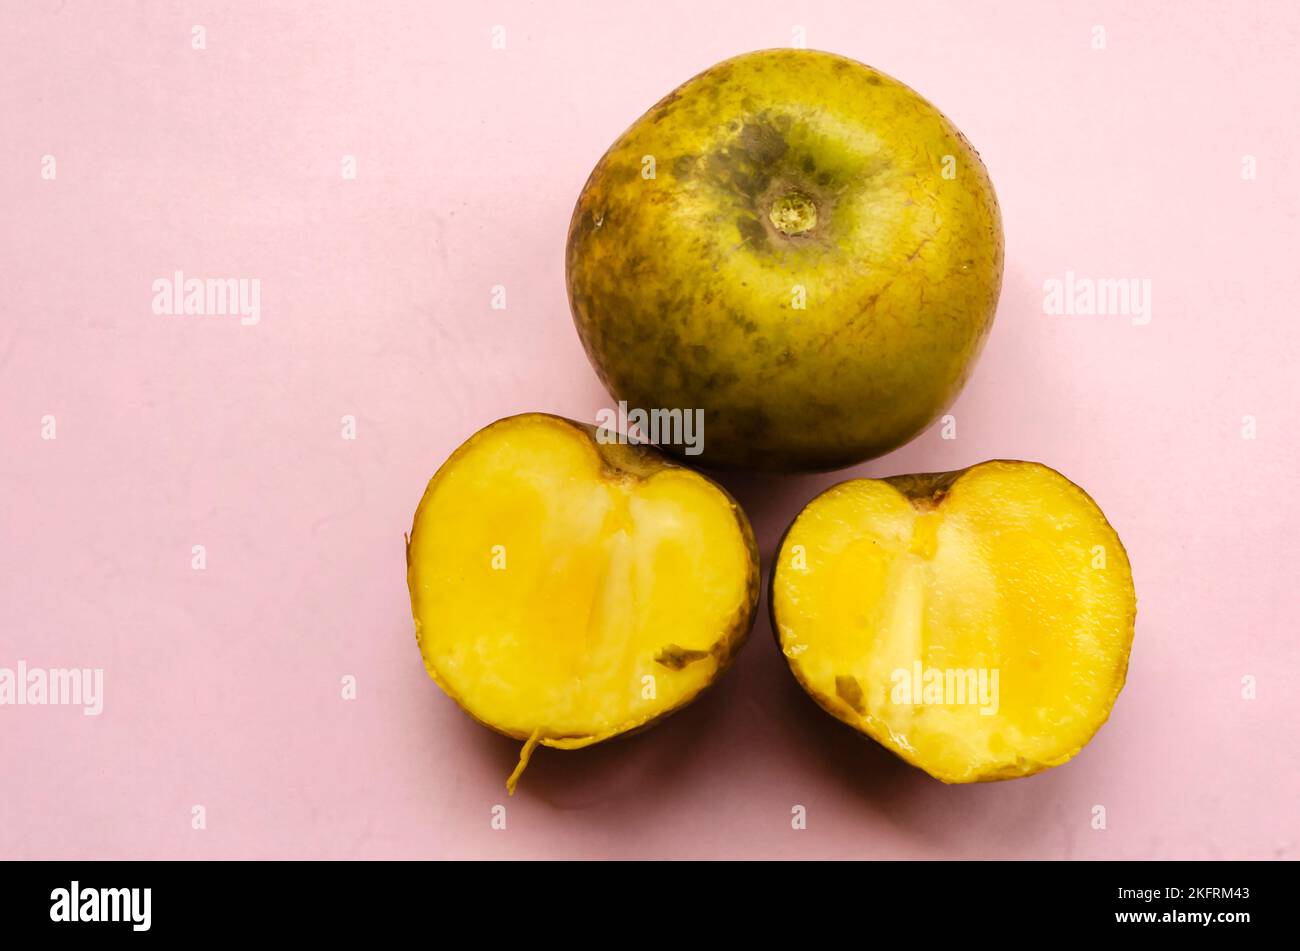 A whole and two halves ripe white sapote fruits are on a pink surface. Stock Photo